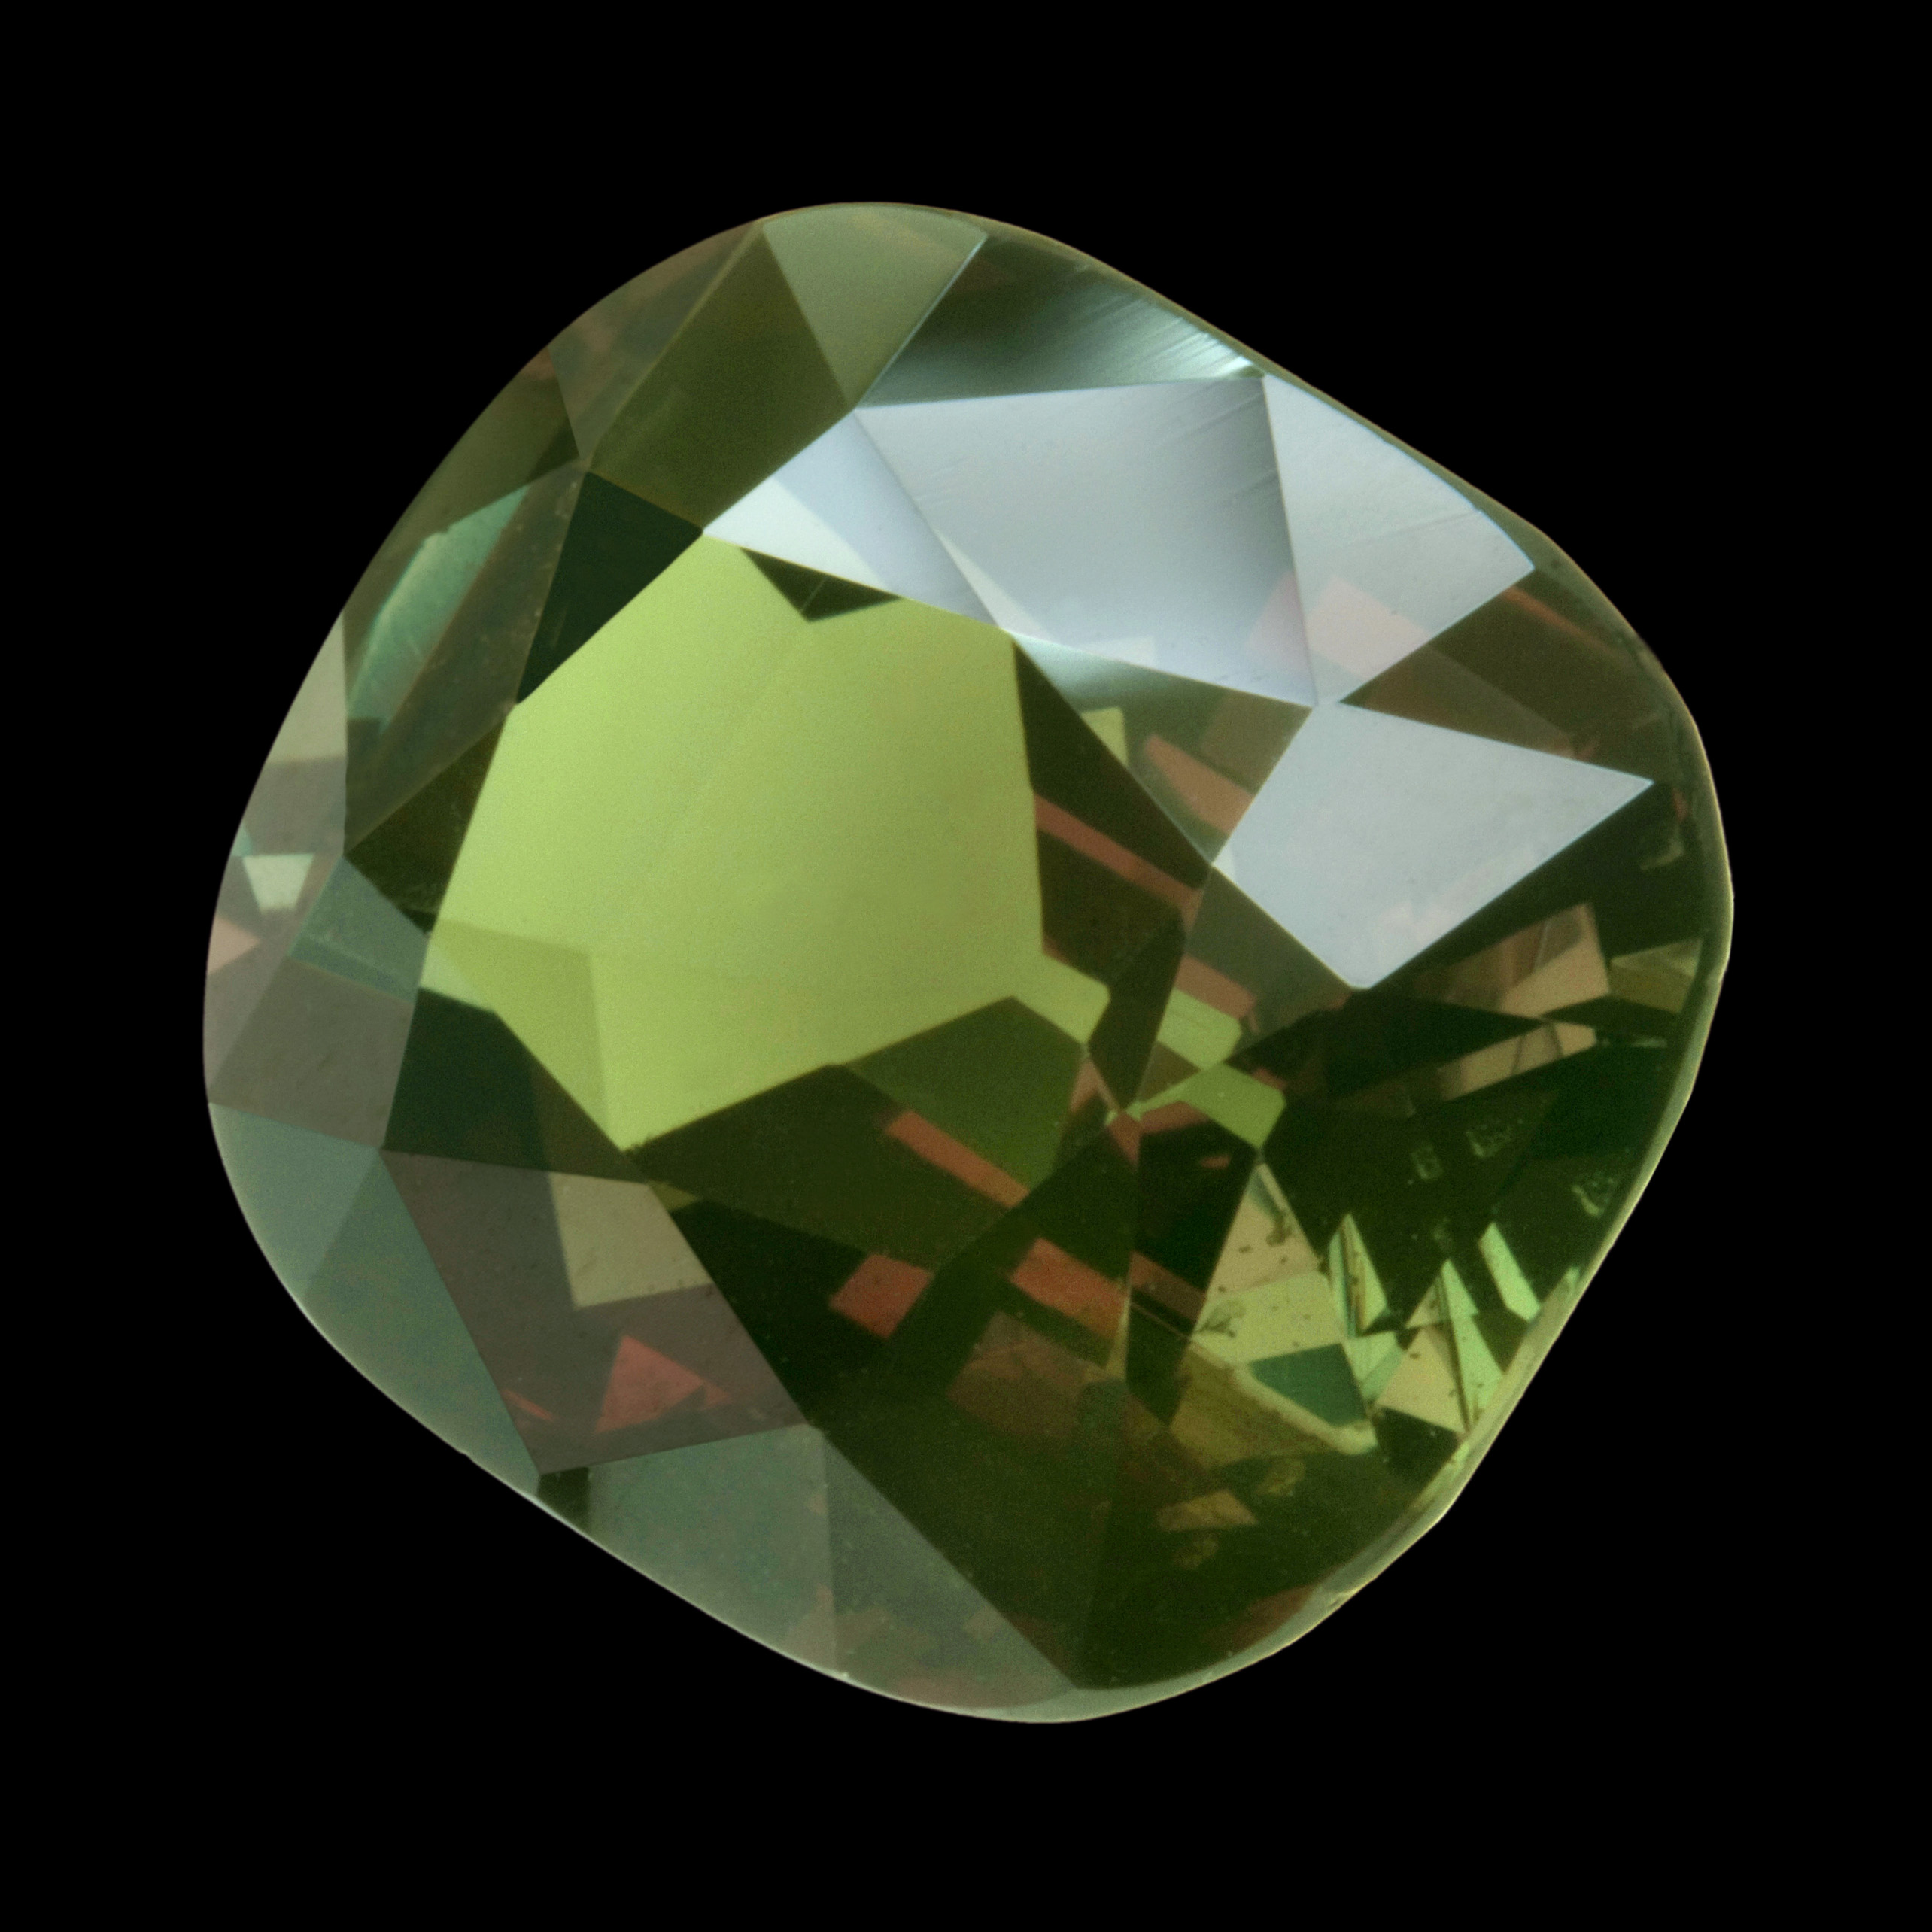 Faceted gem weighing 11.65 carats, a rare color changing variety of chrysoberyl called alexandrite. Shown here in green as seen in daylight. Stone is 14 mm in height.